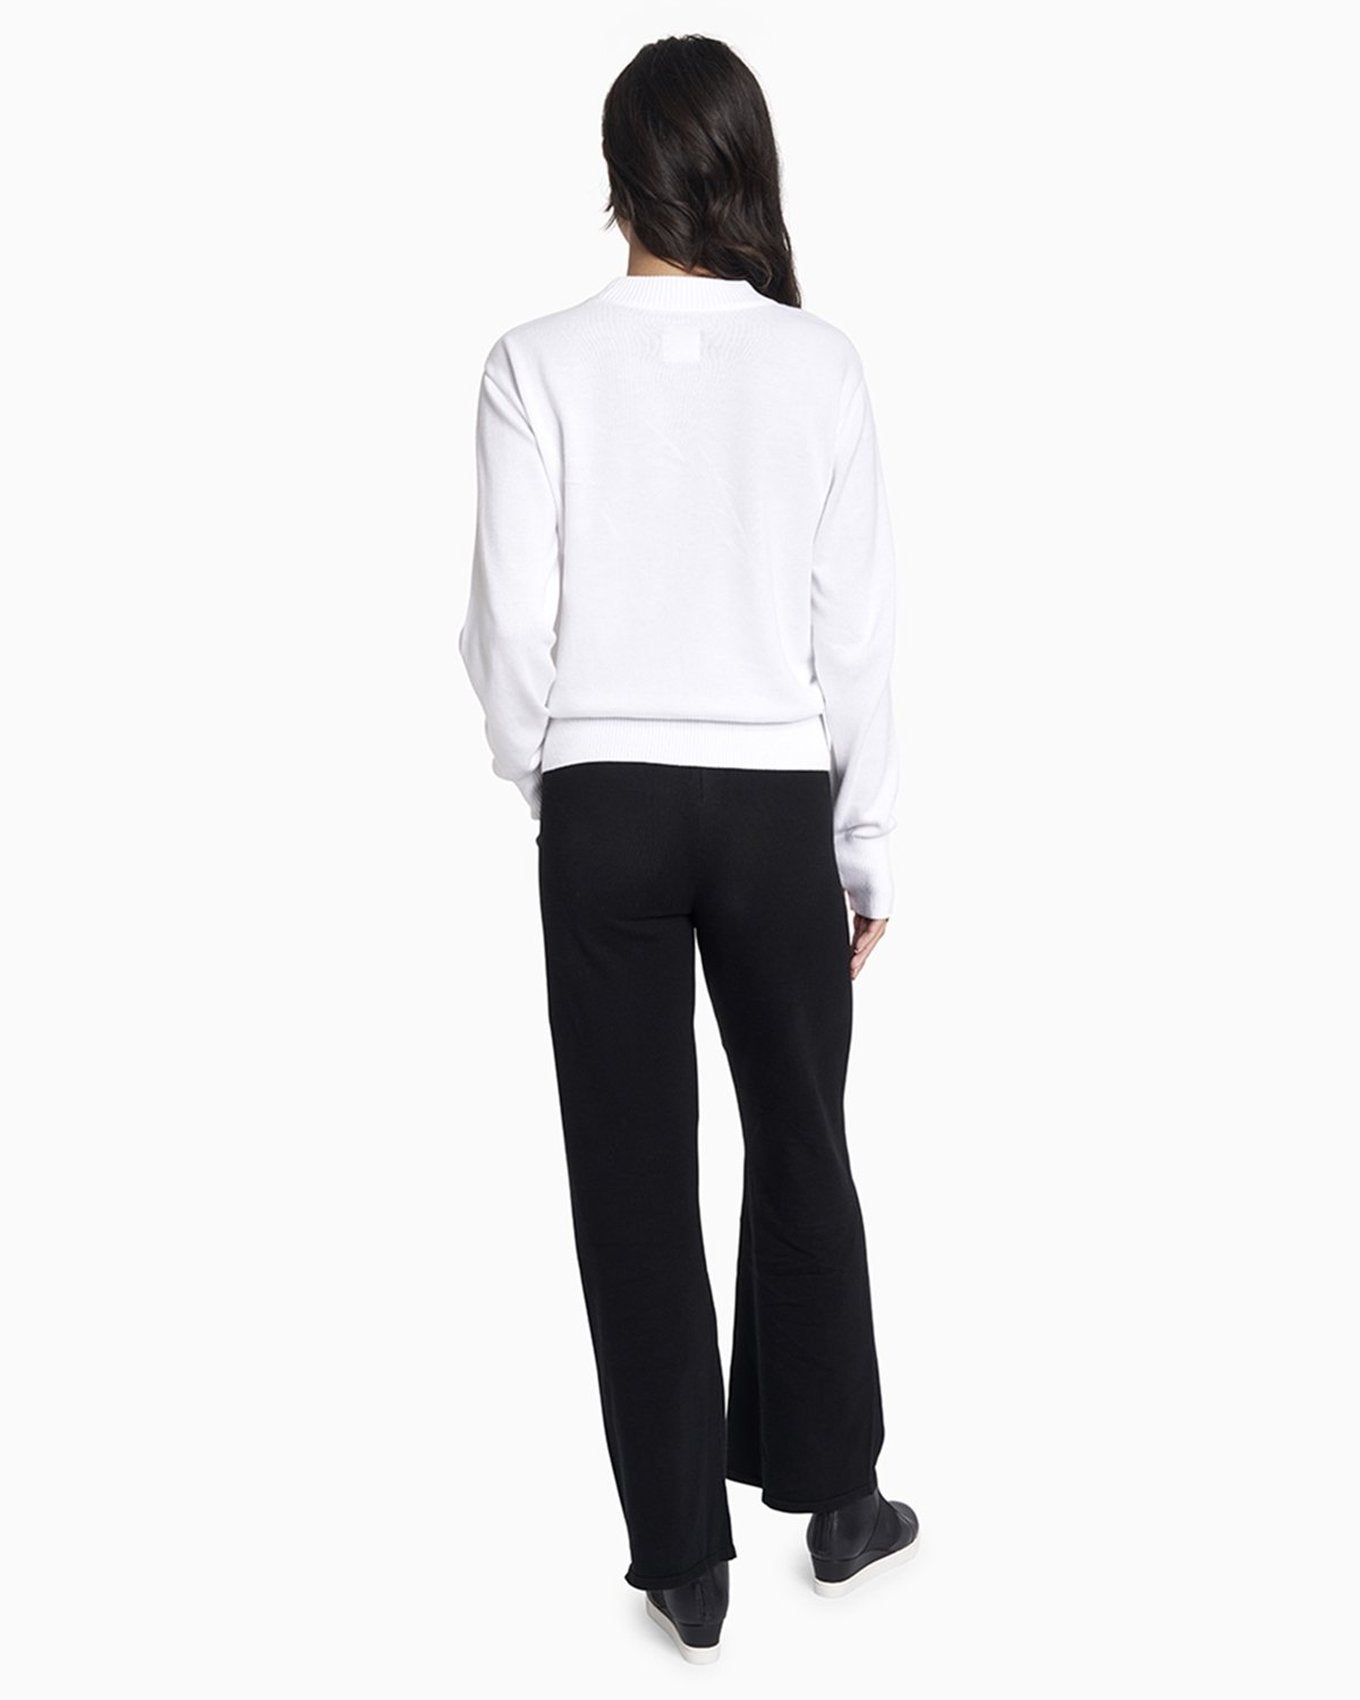 YesAnd Organic Knit Pant Knit Pant in color Jet Black and shape pants